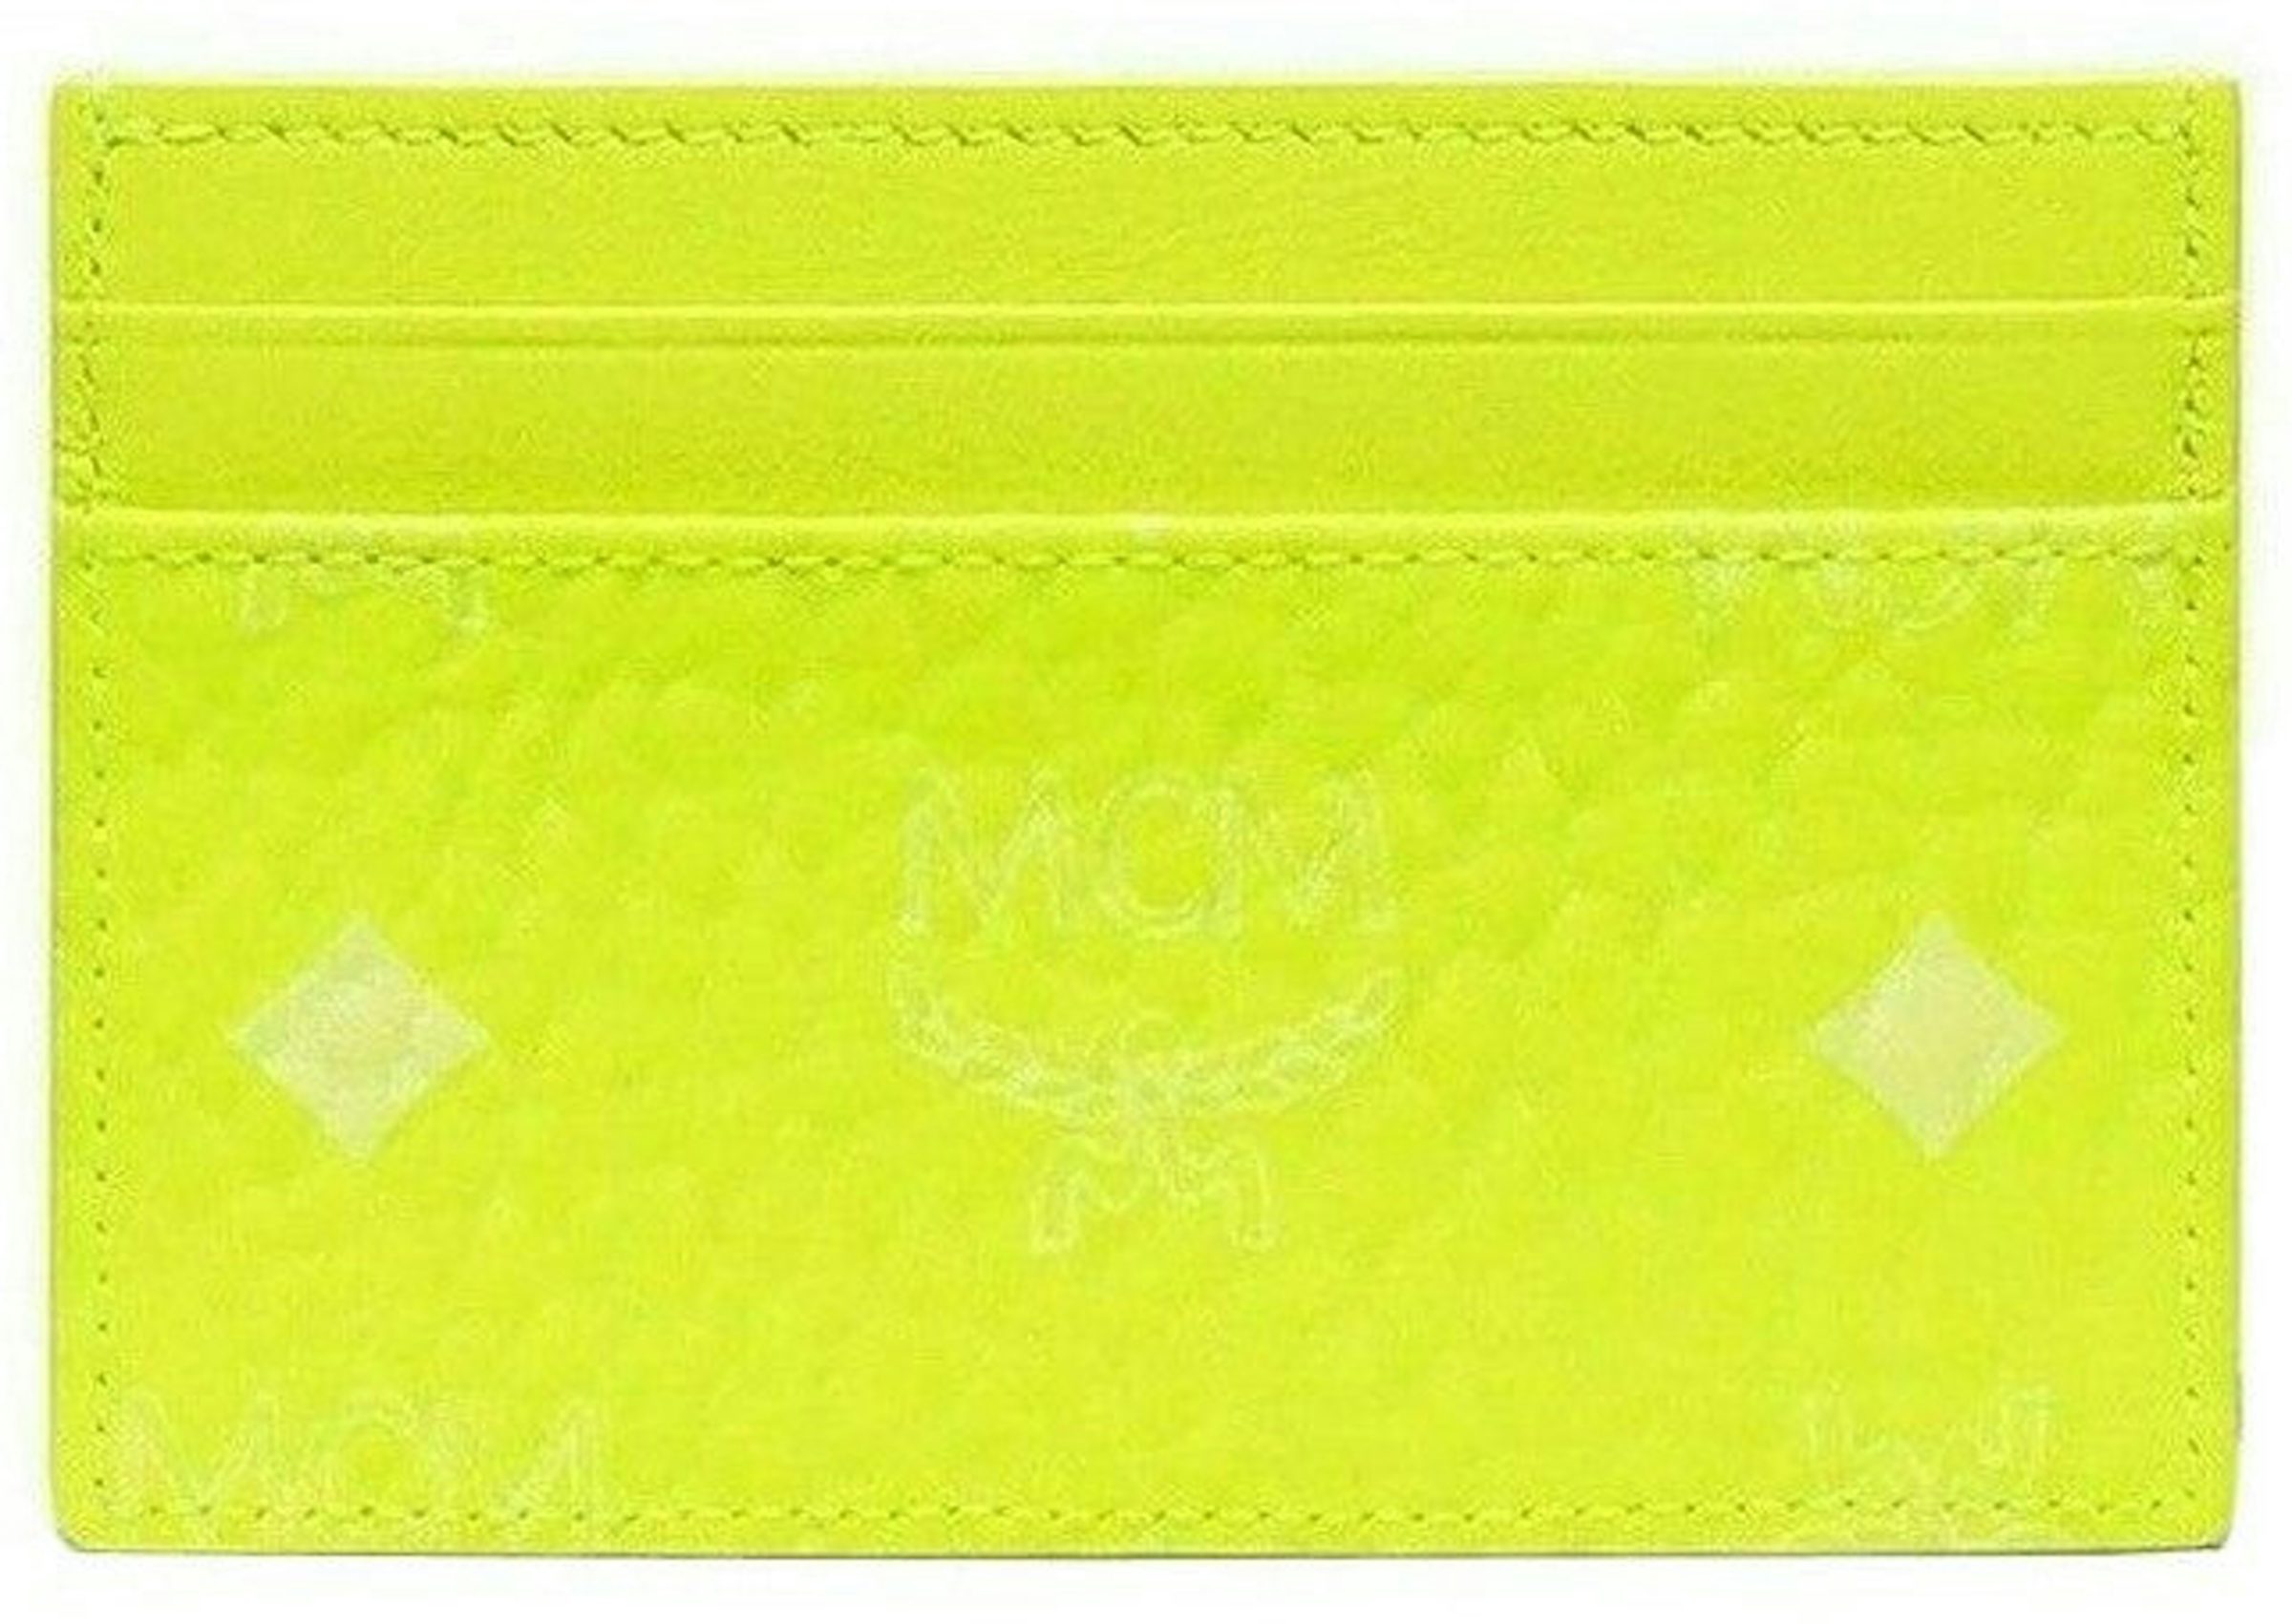 Luxury Card Holders for Less - StockX News